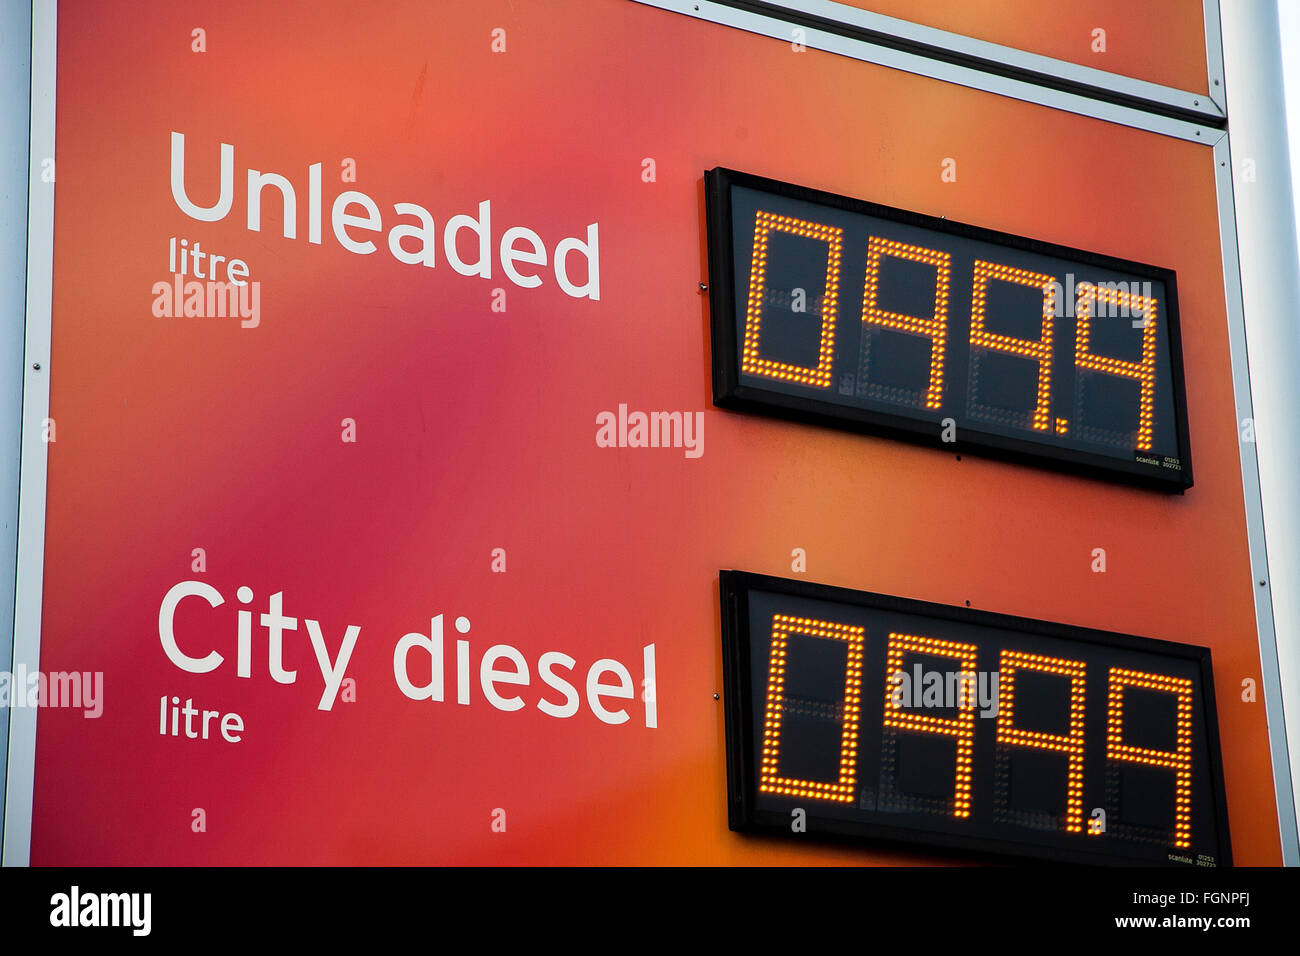 Supermarket giant, Sainsburys selling unleaded petrol and City diesel for less than £1 per litre Stock Photo